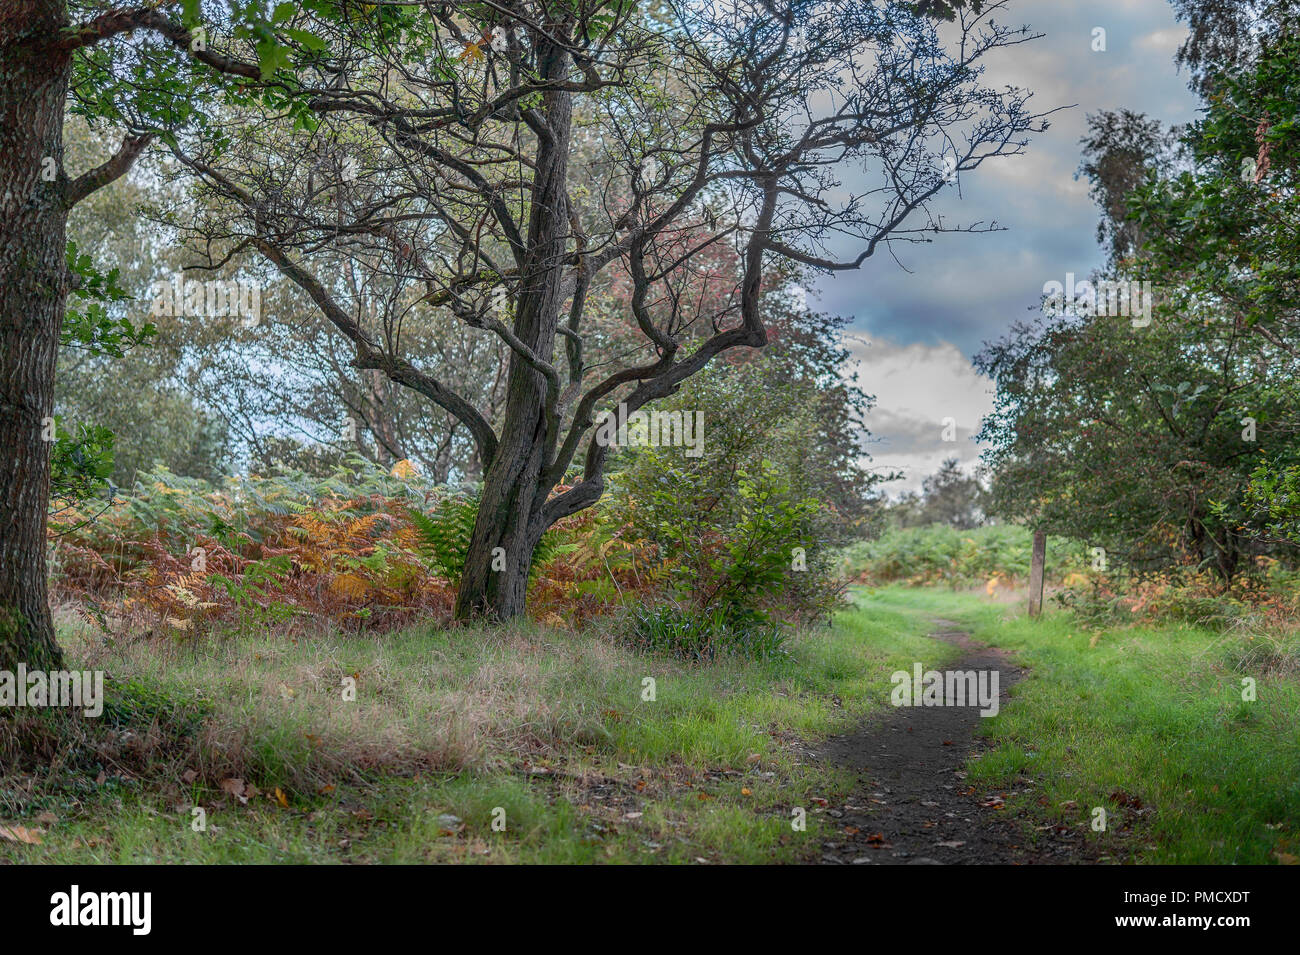 A tree in Calderwood Country Park. Stock Photo